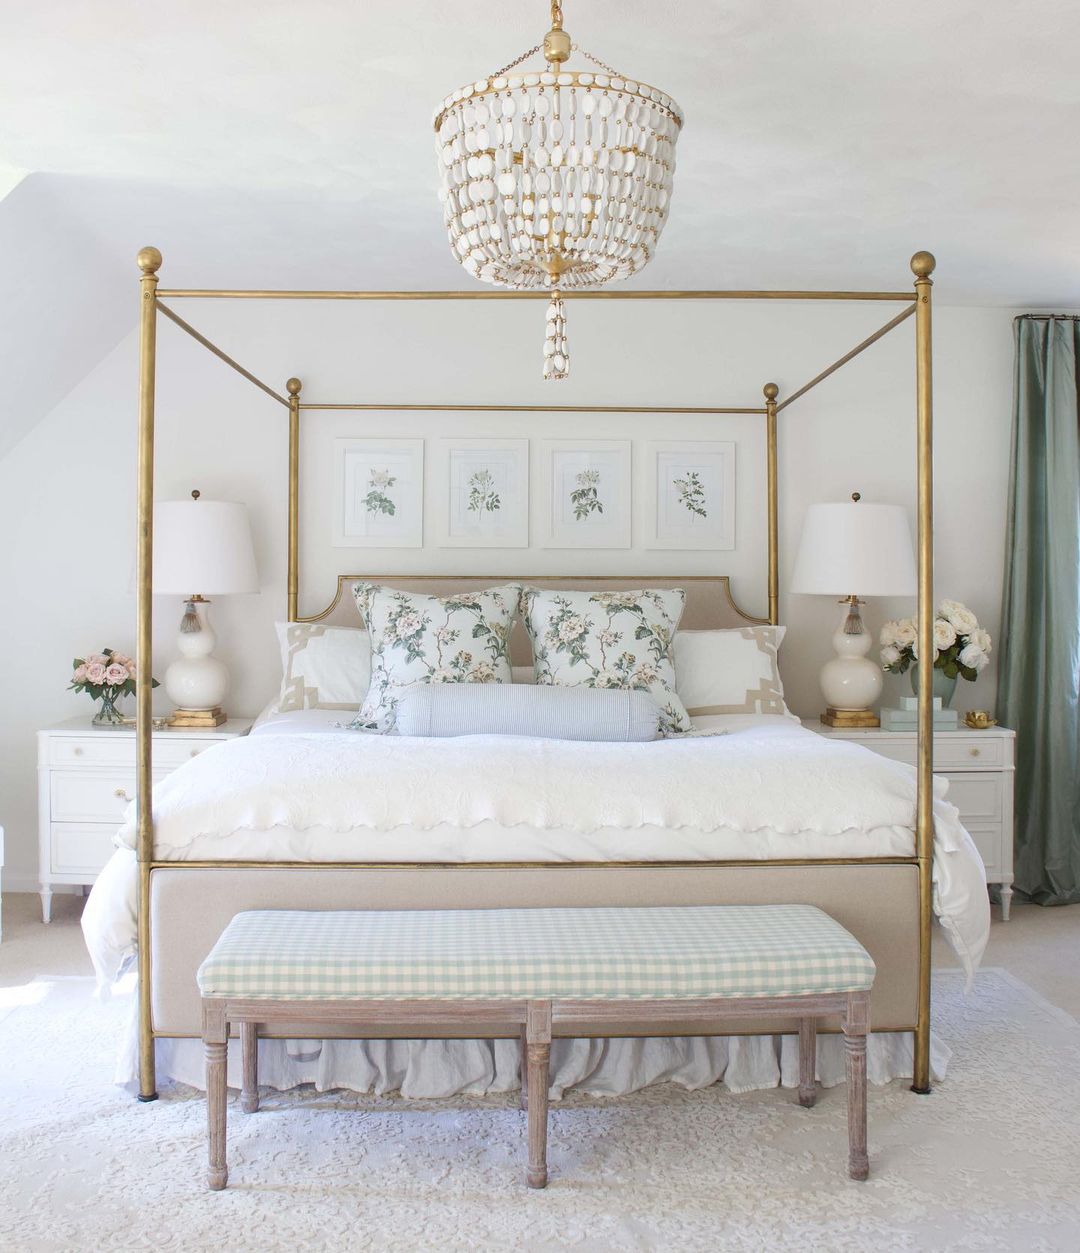 Southern Flair and Charm: 10 Romantic Bedroom Design Ideas